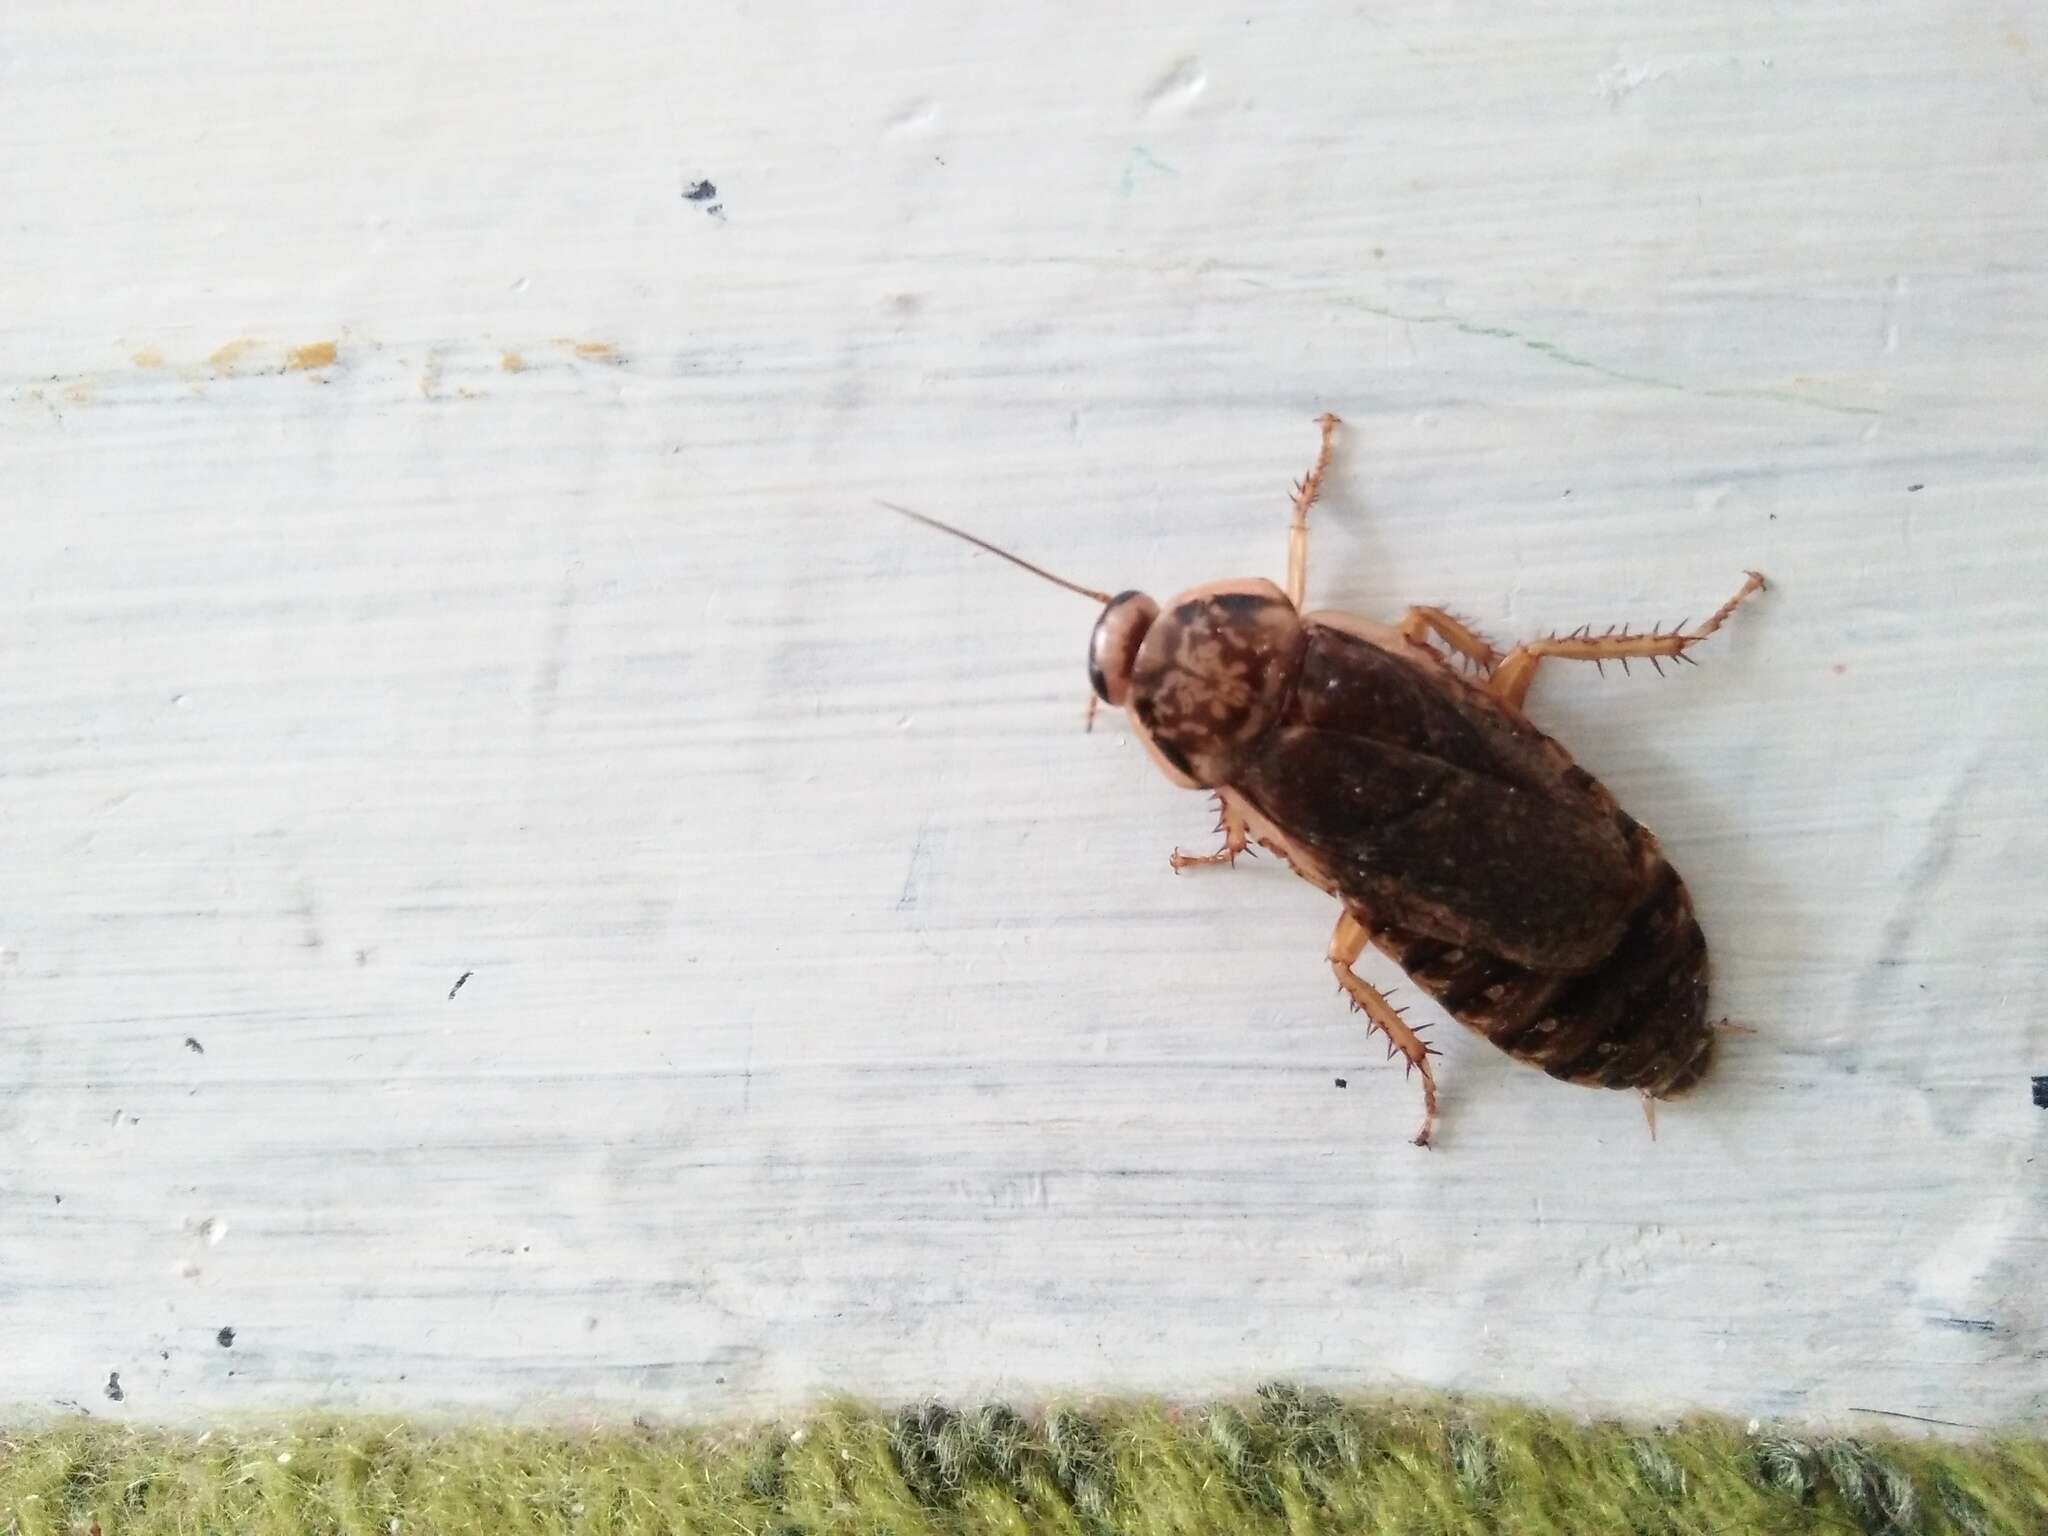 Image of Cinereous cockroach